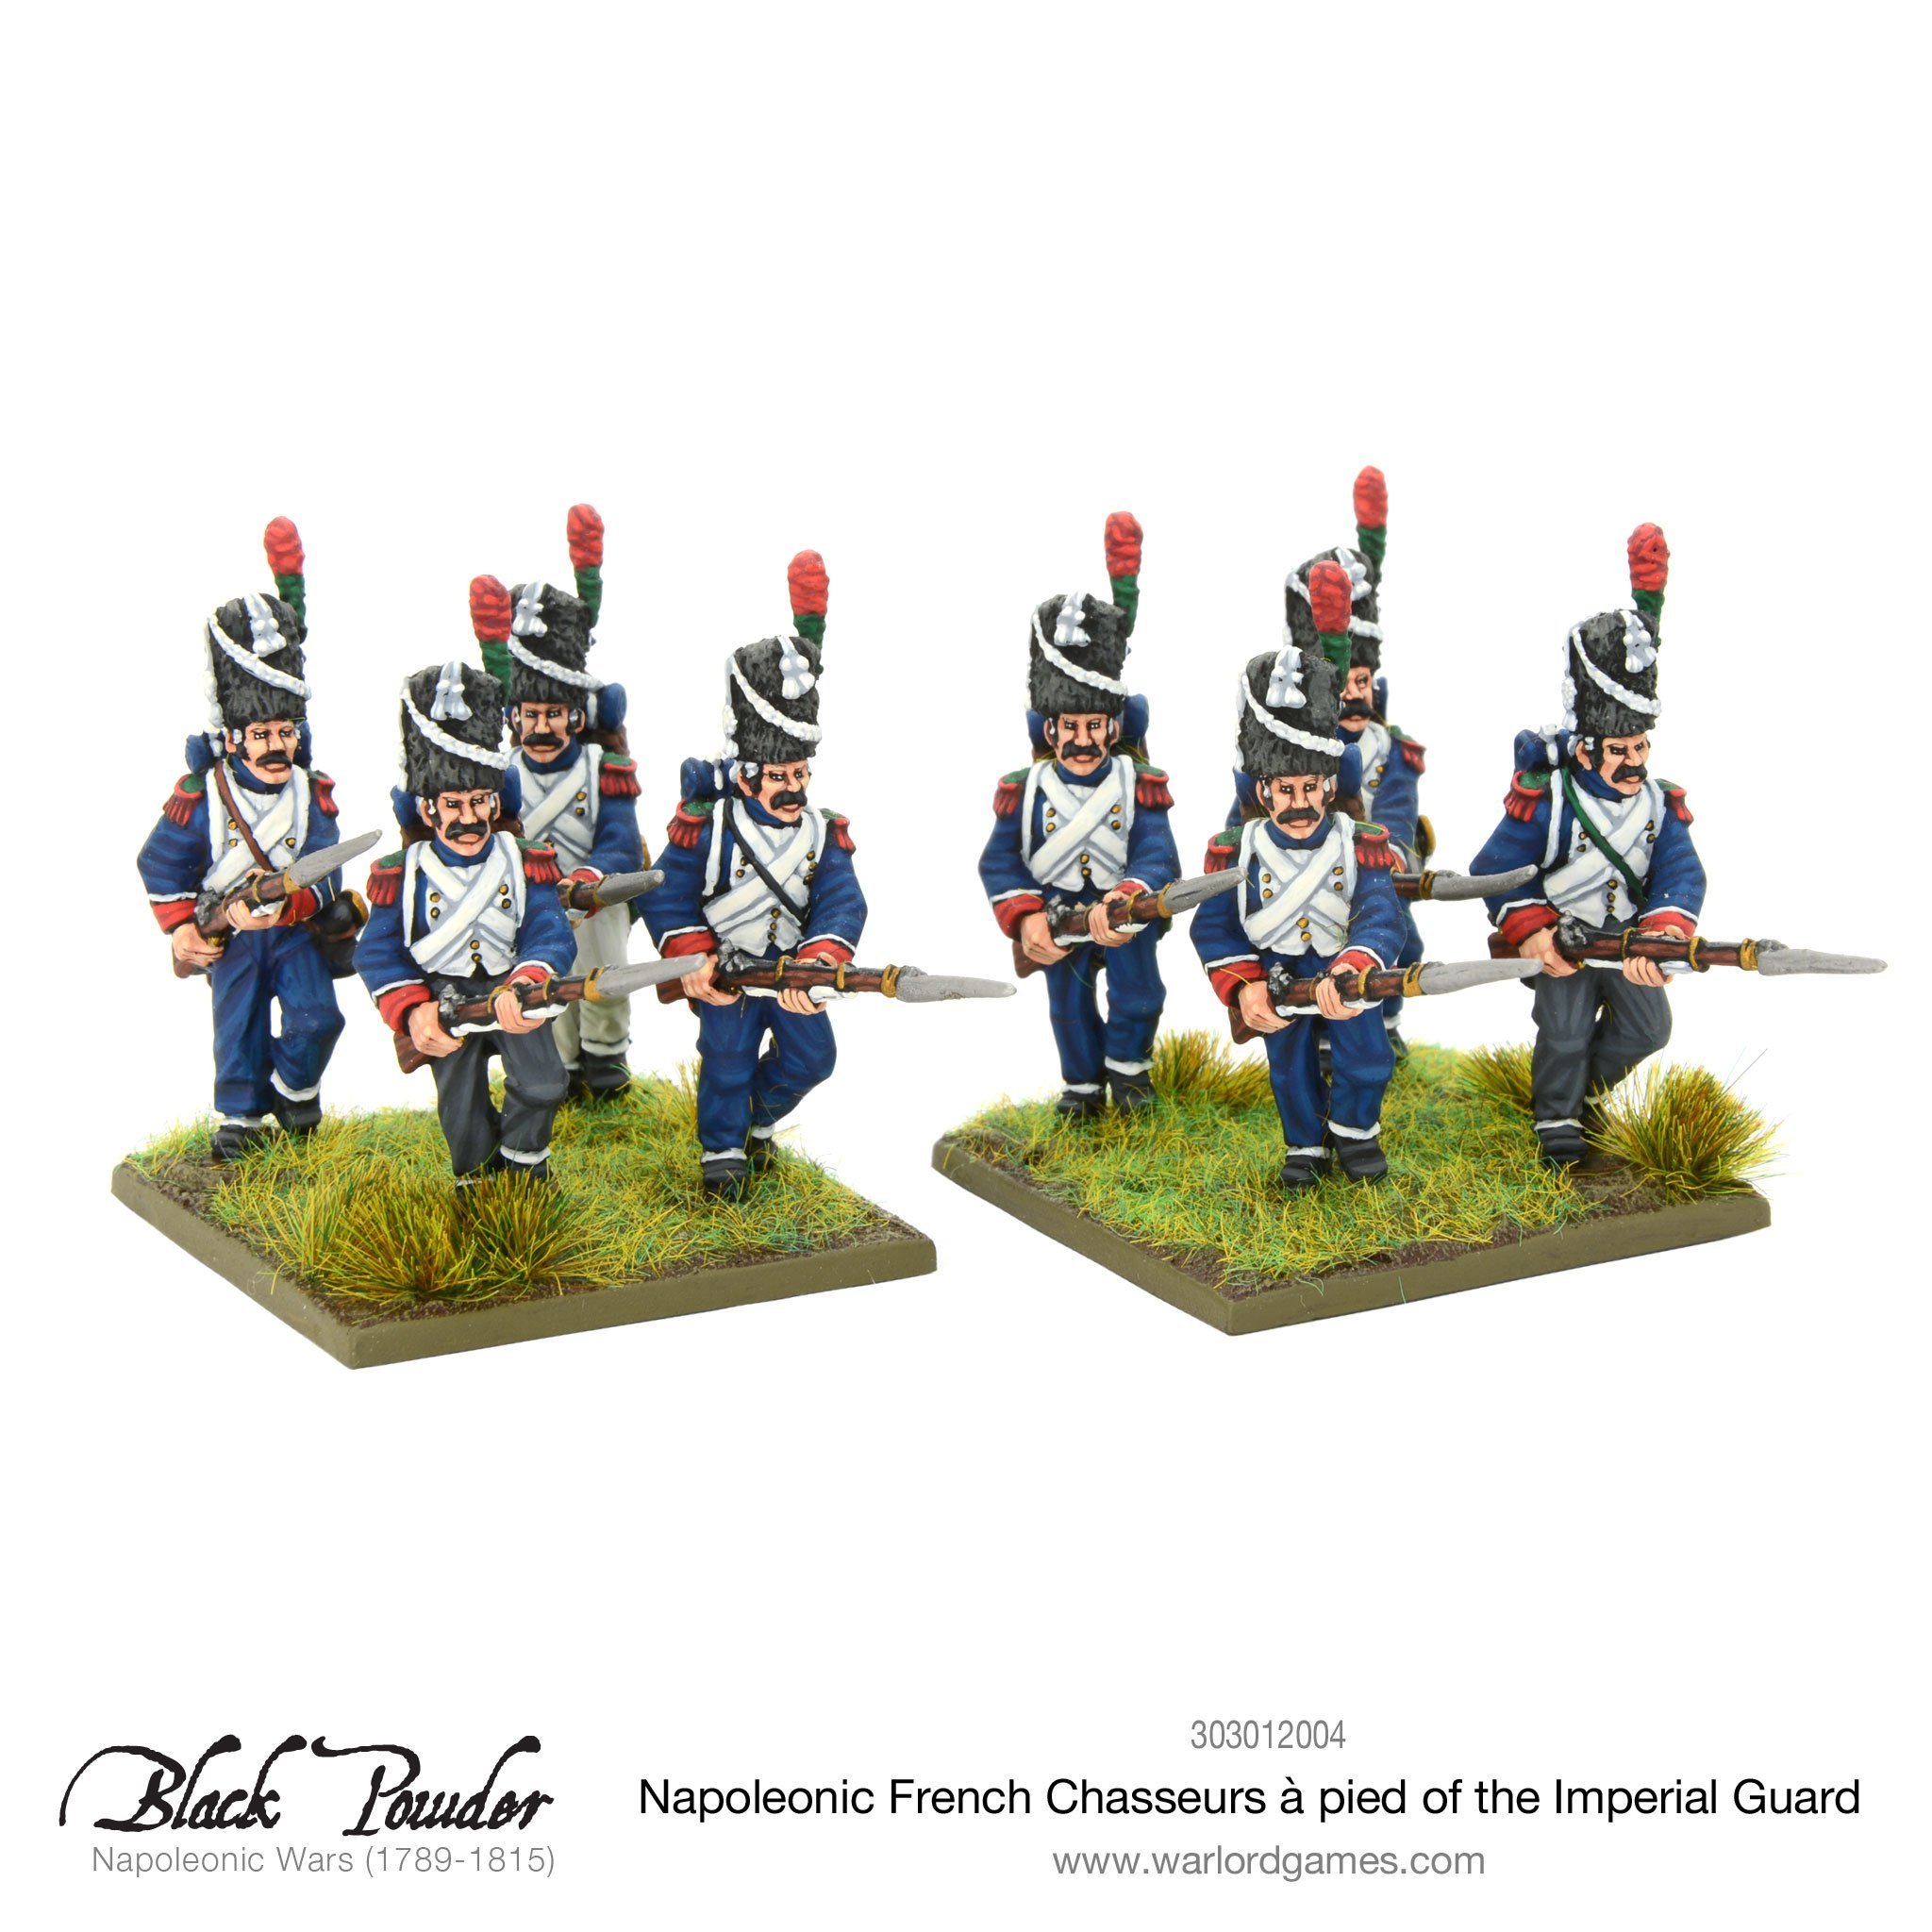 Black Powder Napoleonic Wars: Napoleonic French Chasseurs a Pied of the Imperial Guard 